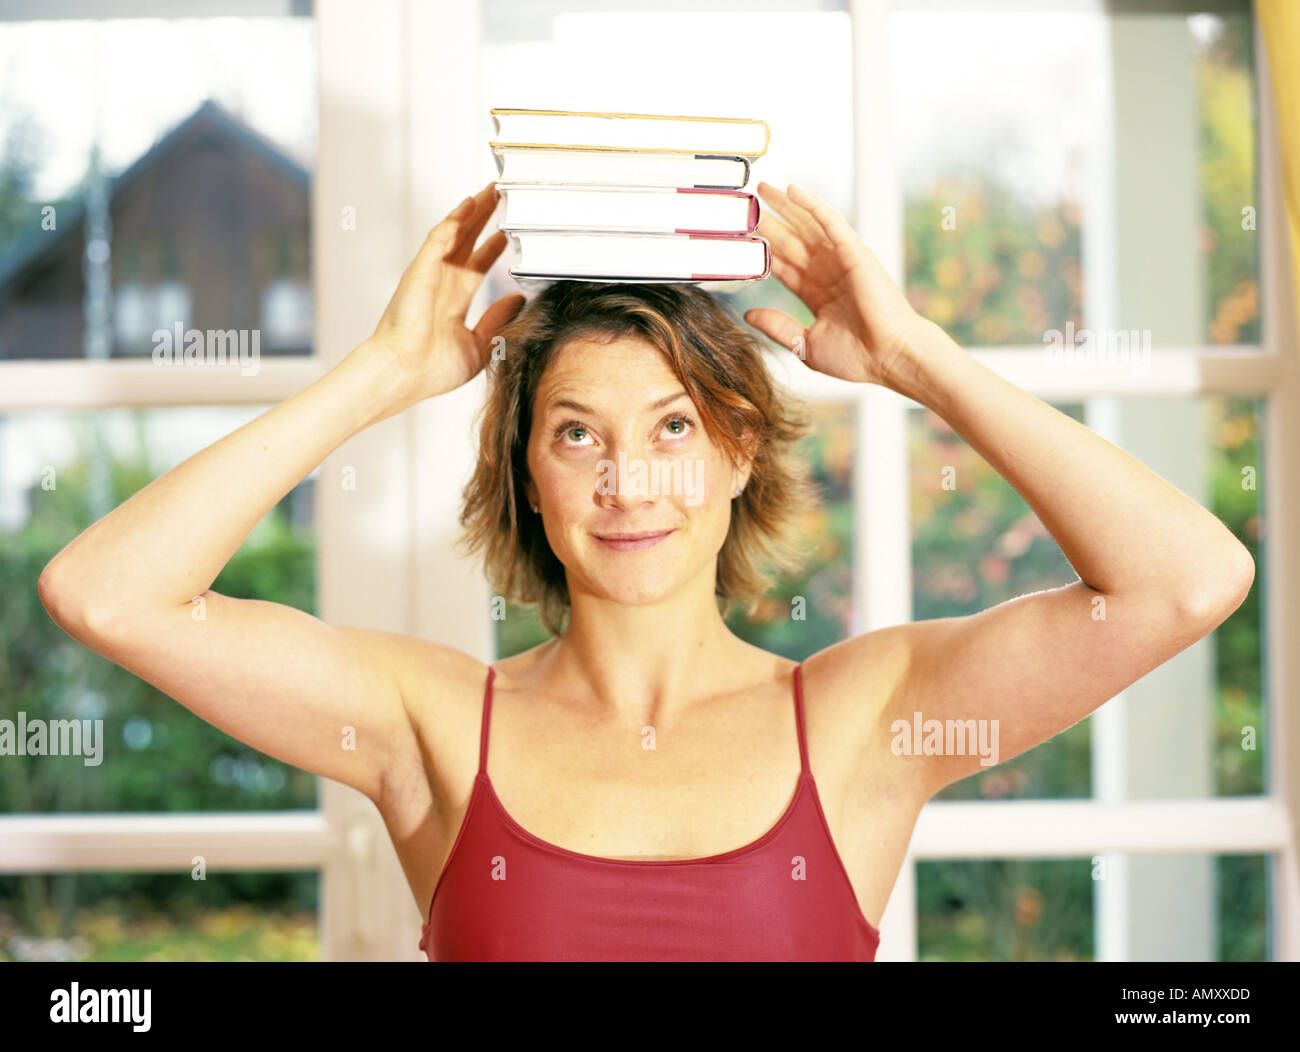 Young woman balancing books on head Banque D'Images